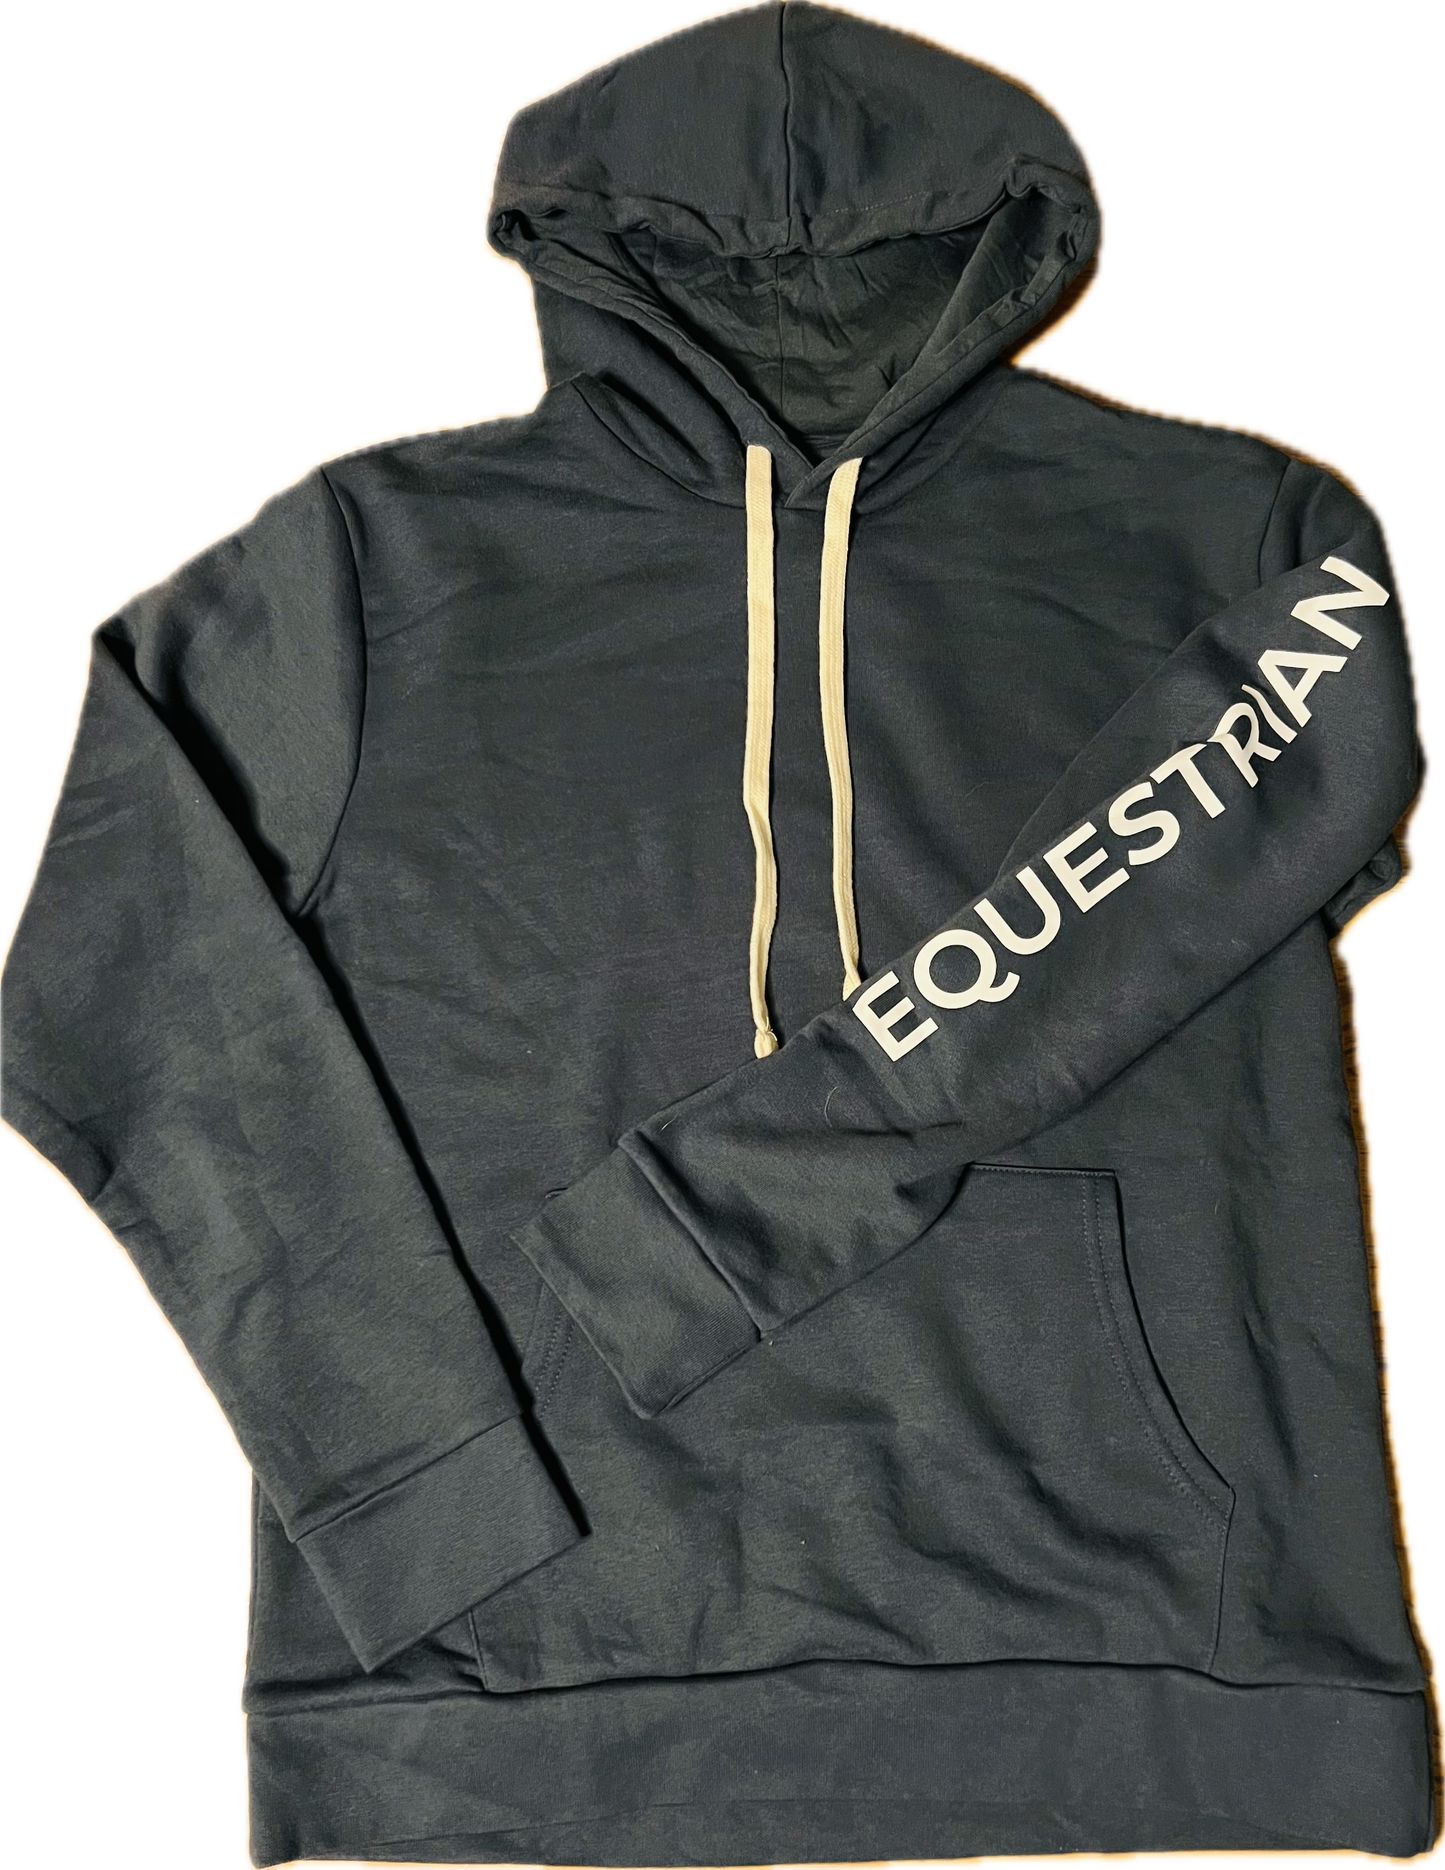 Limited S&S Equestrian Hoodie